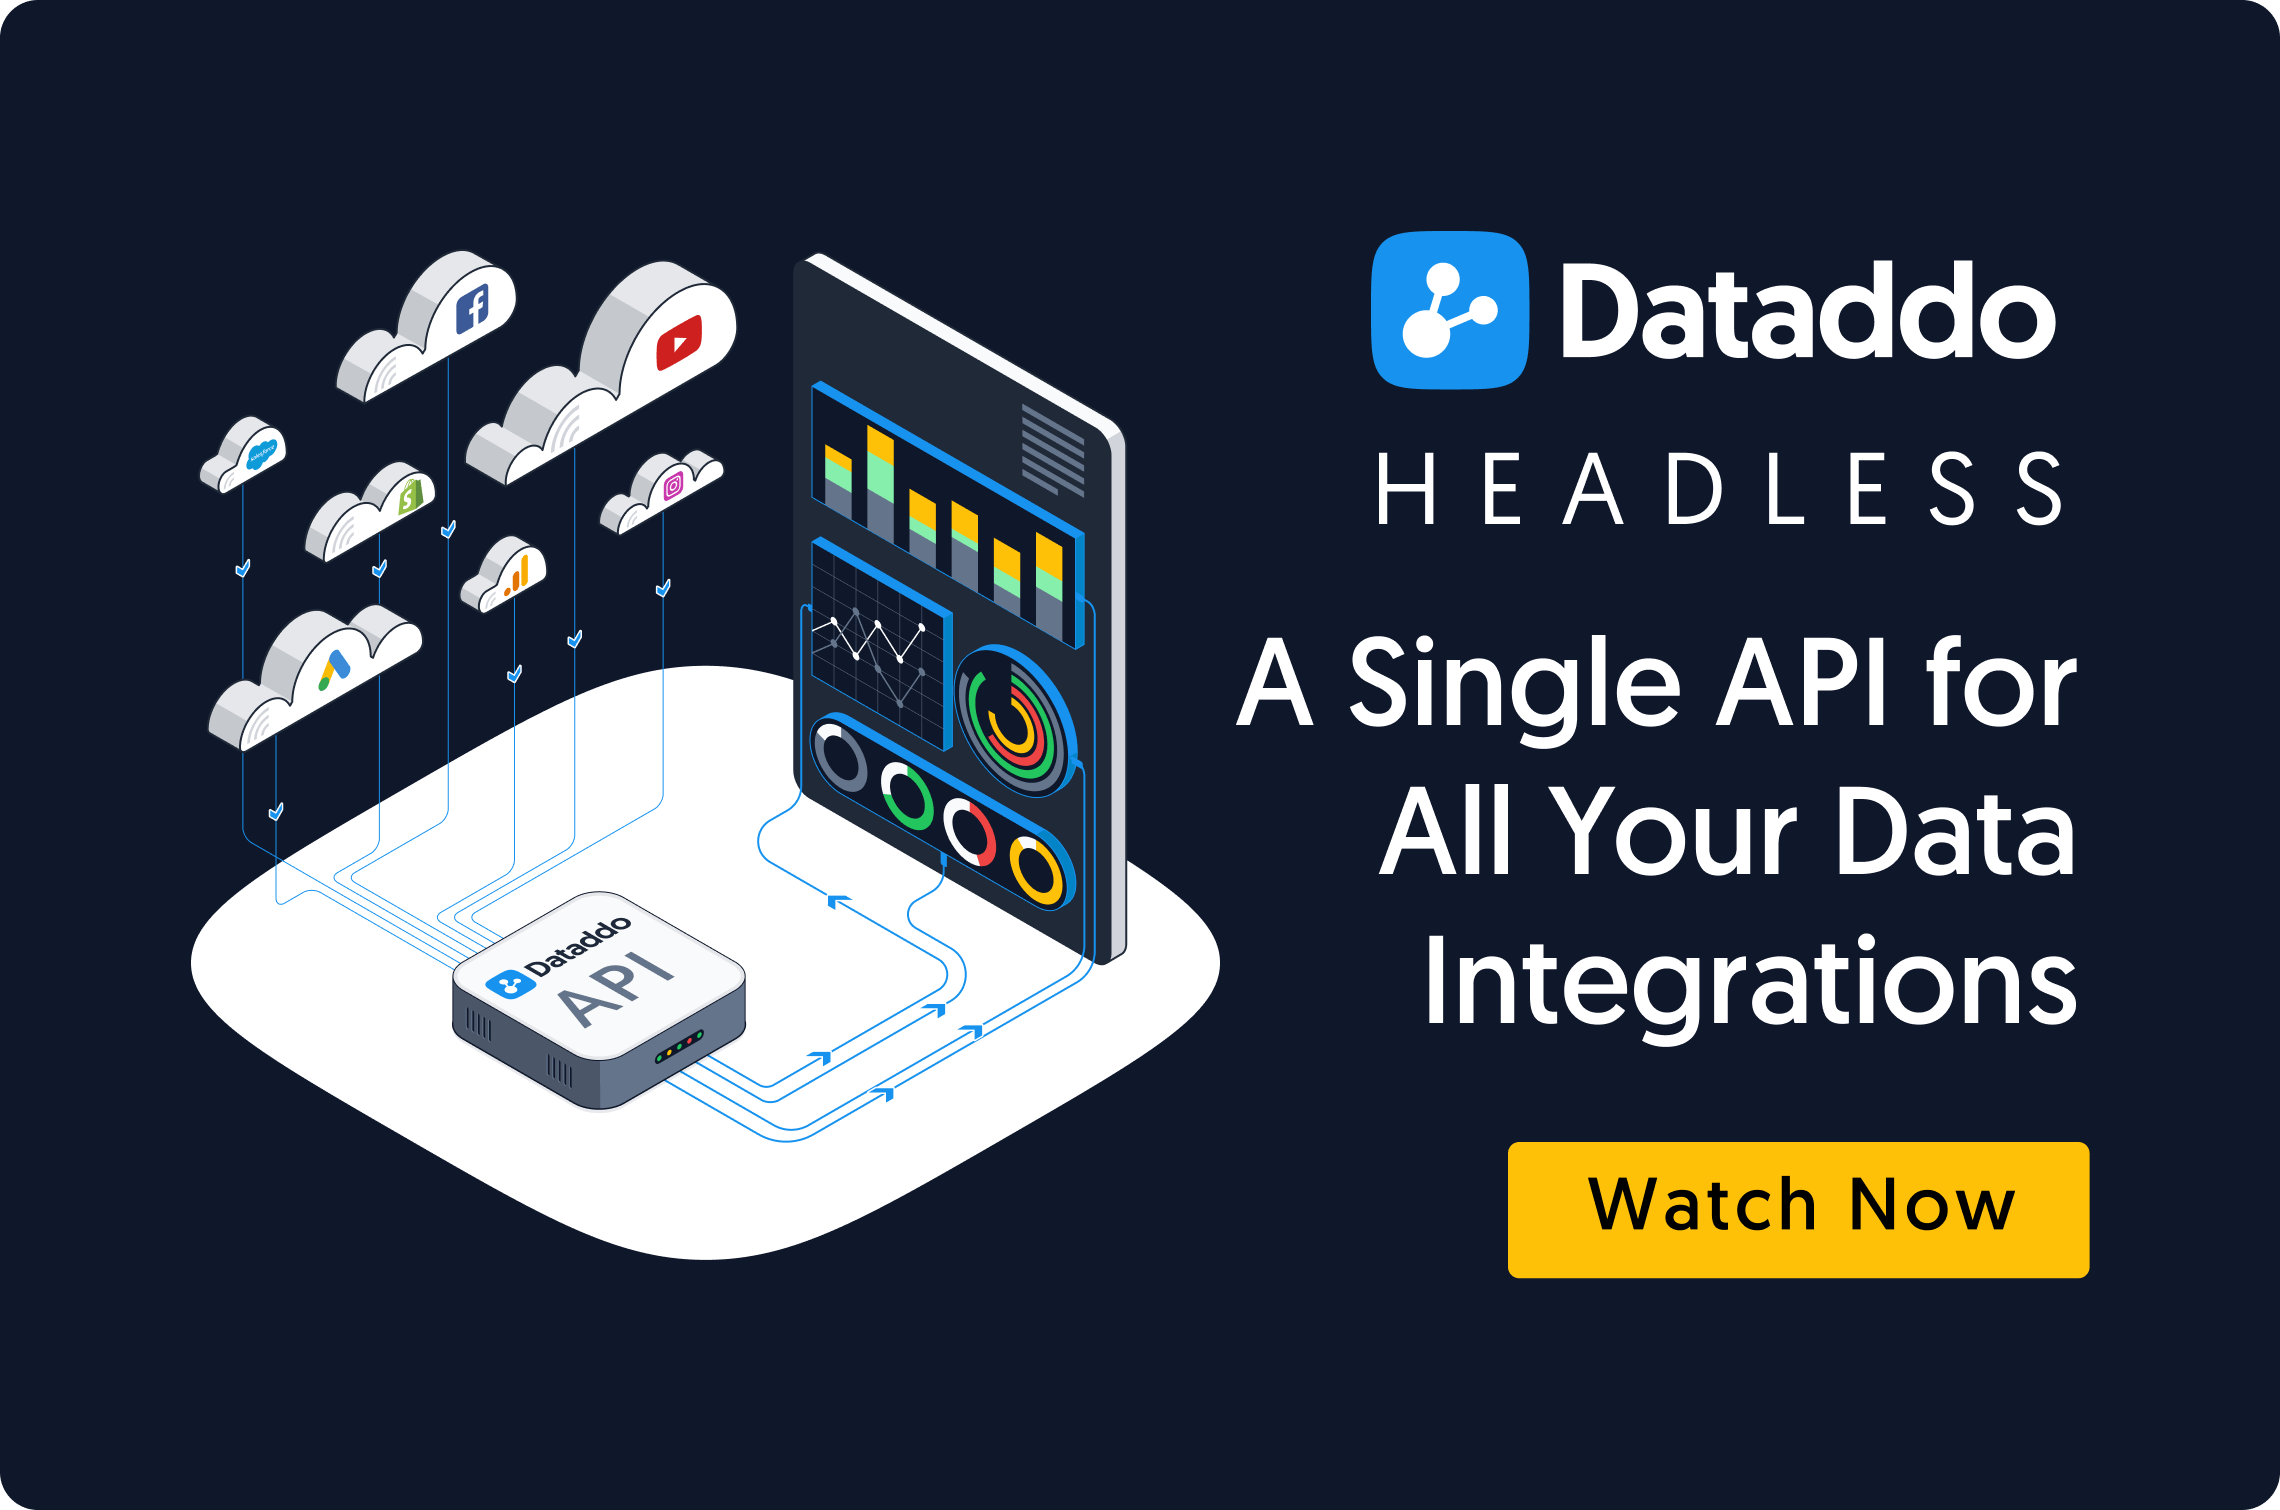 [VIDEO] Dataddo Headless: A Single API for All Your Data Integrations